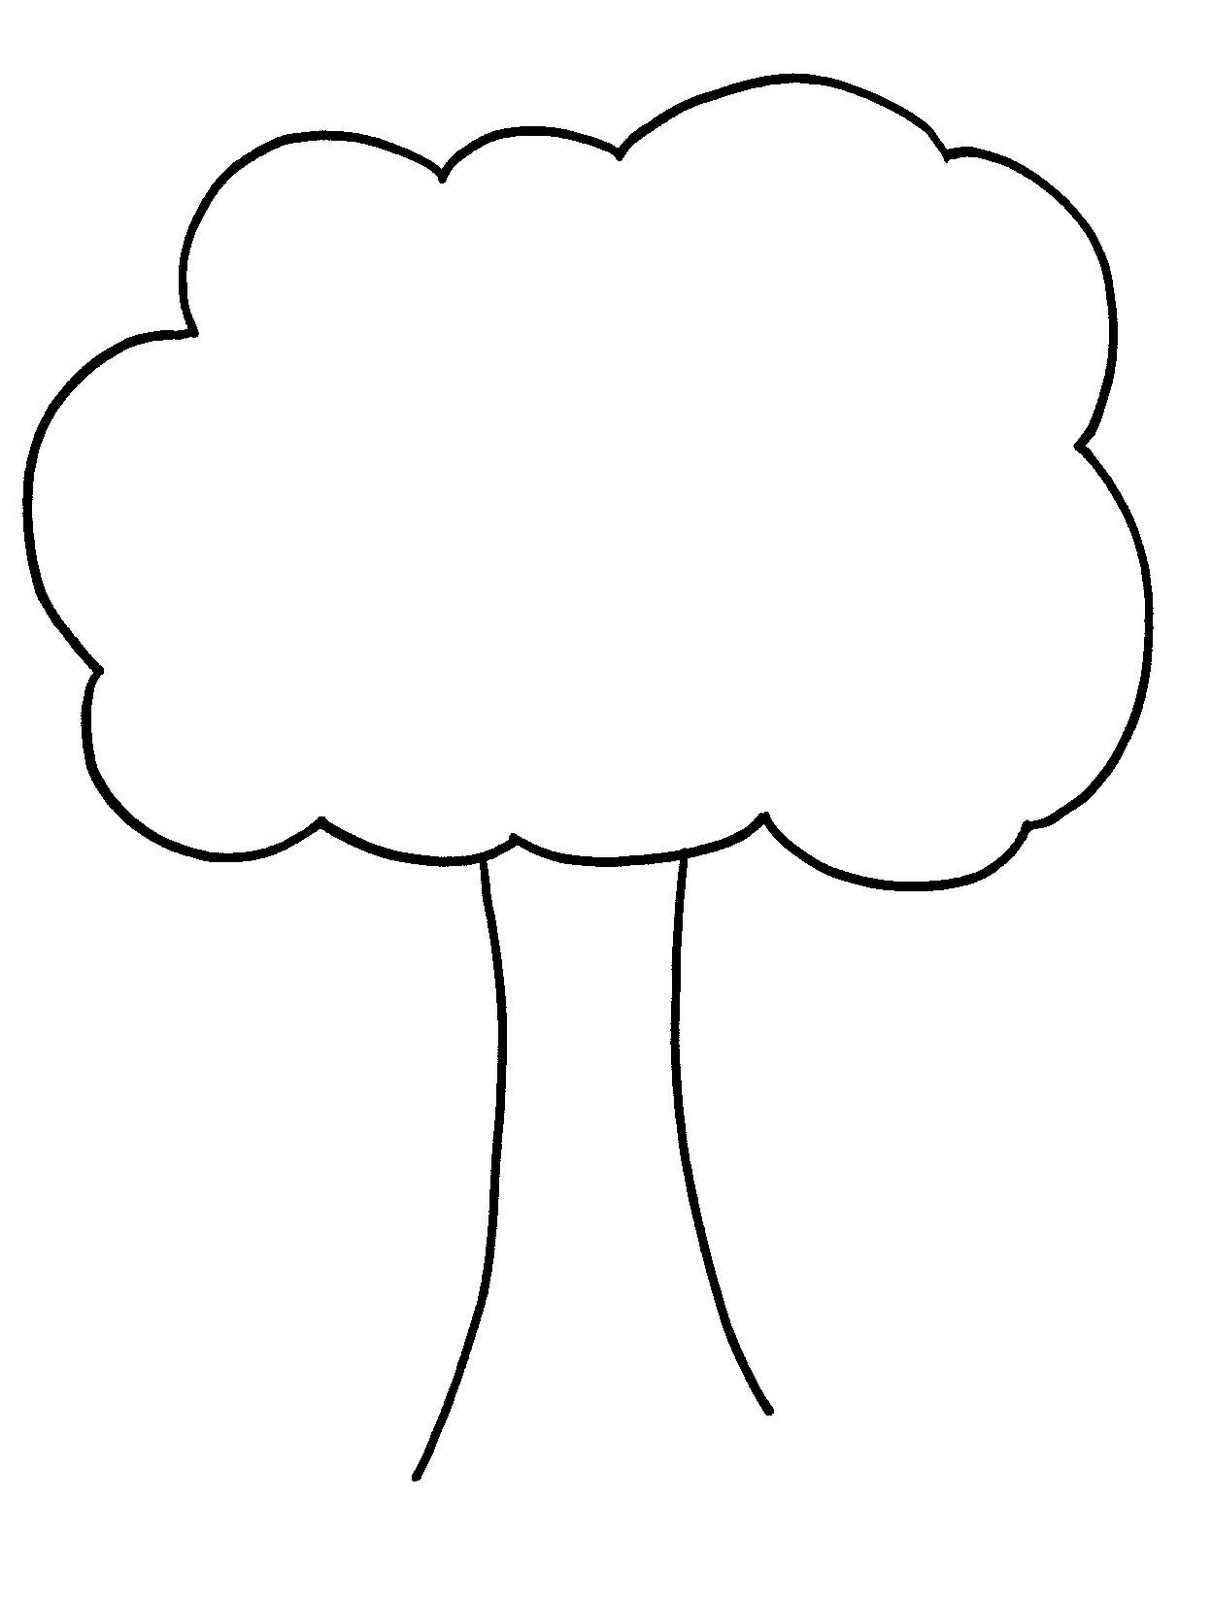 coconut-tree-template-clipart-best